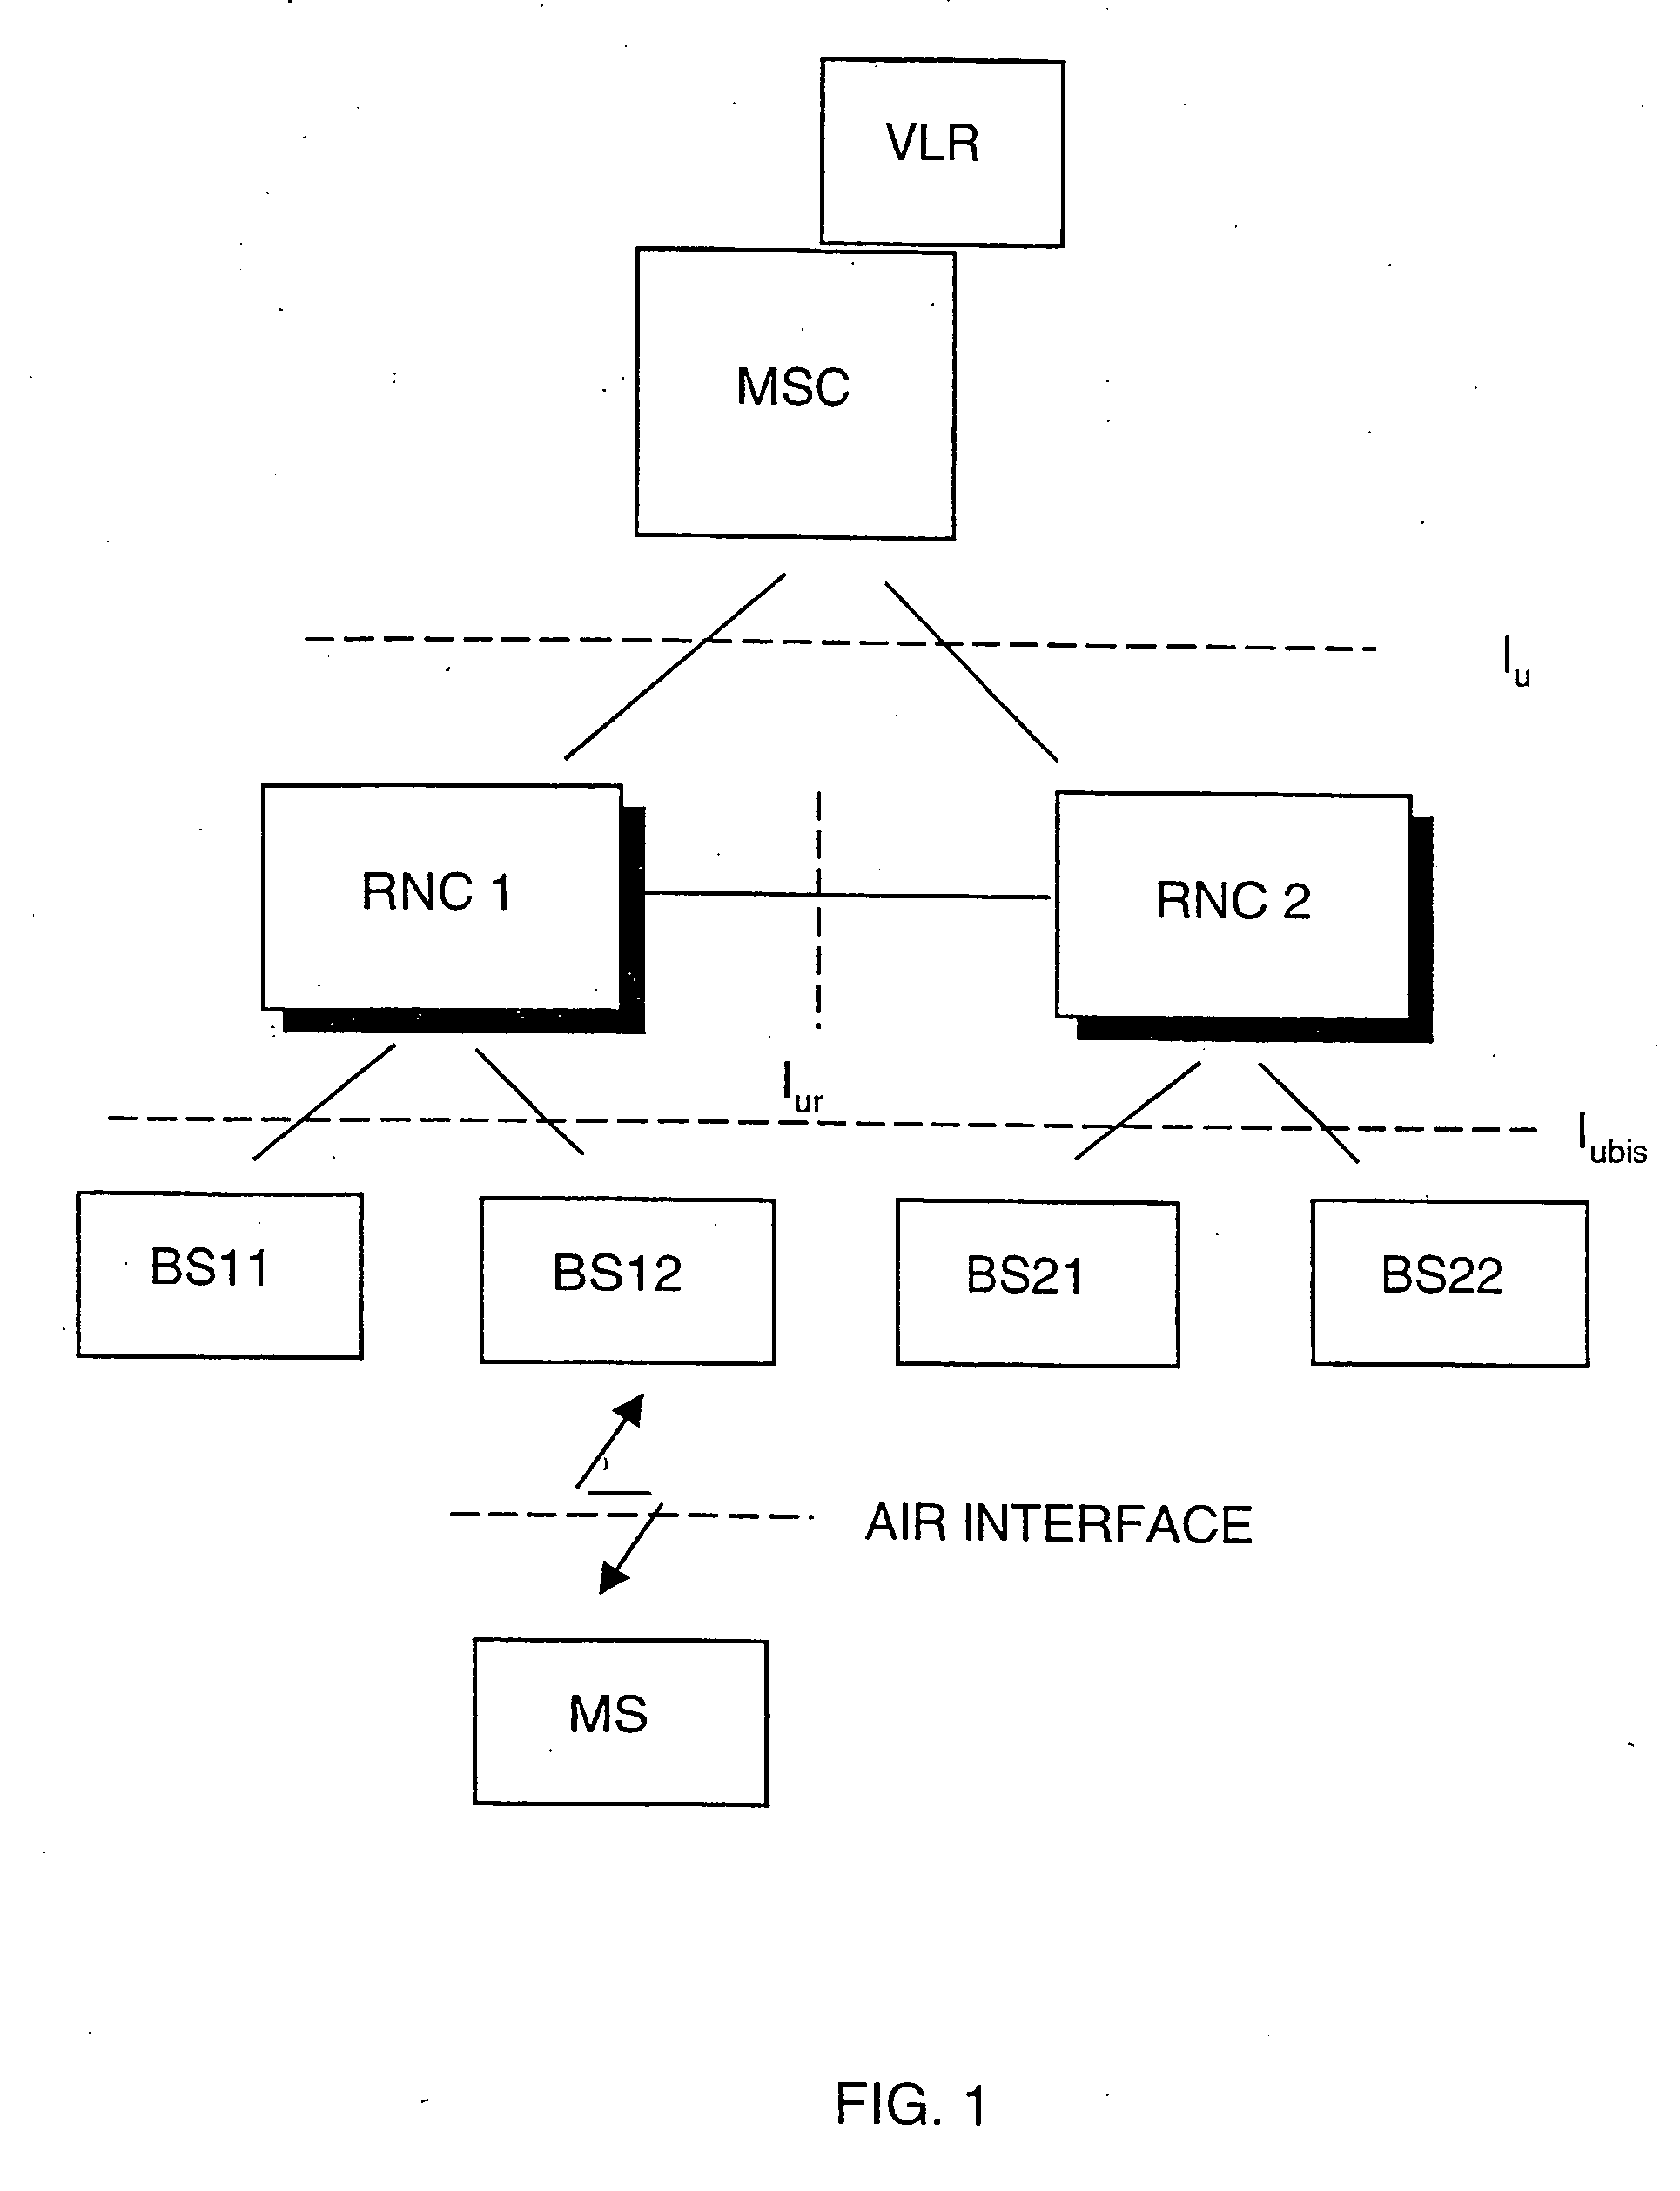 Measurement reporting in a telecommunication system